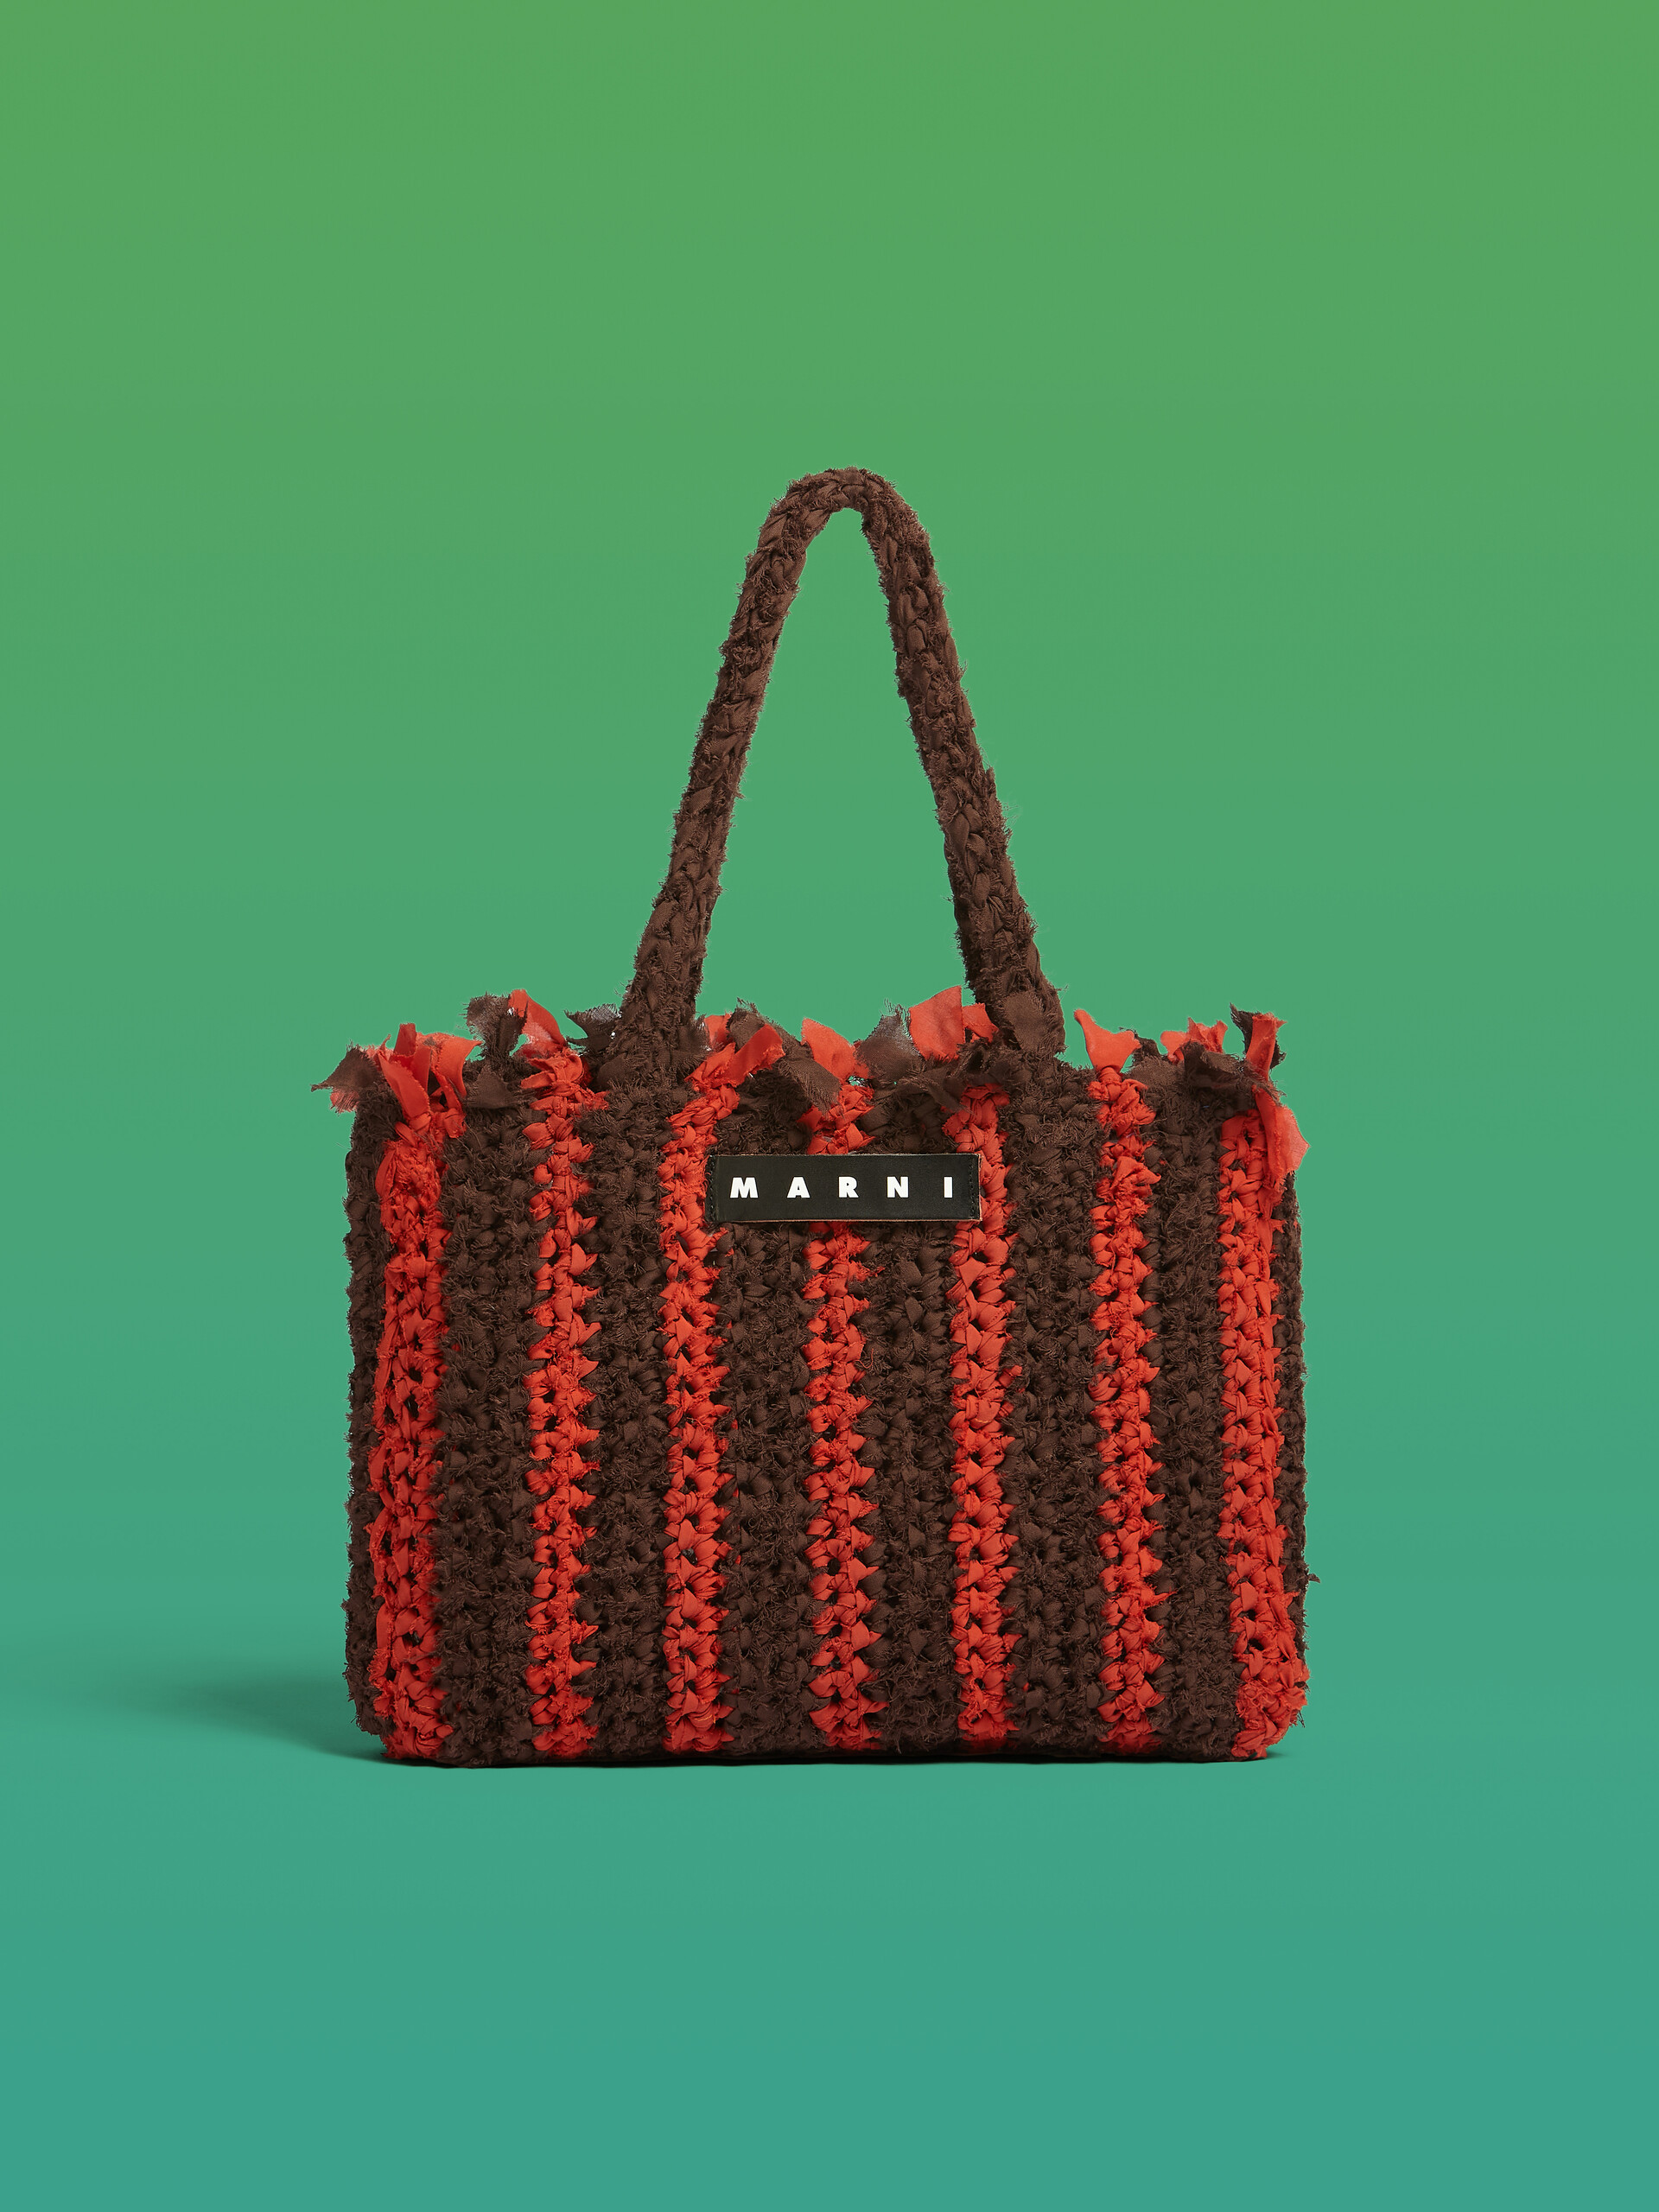 Brown and red cotton MARNI MARKET bag - Bags - Image 1